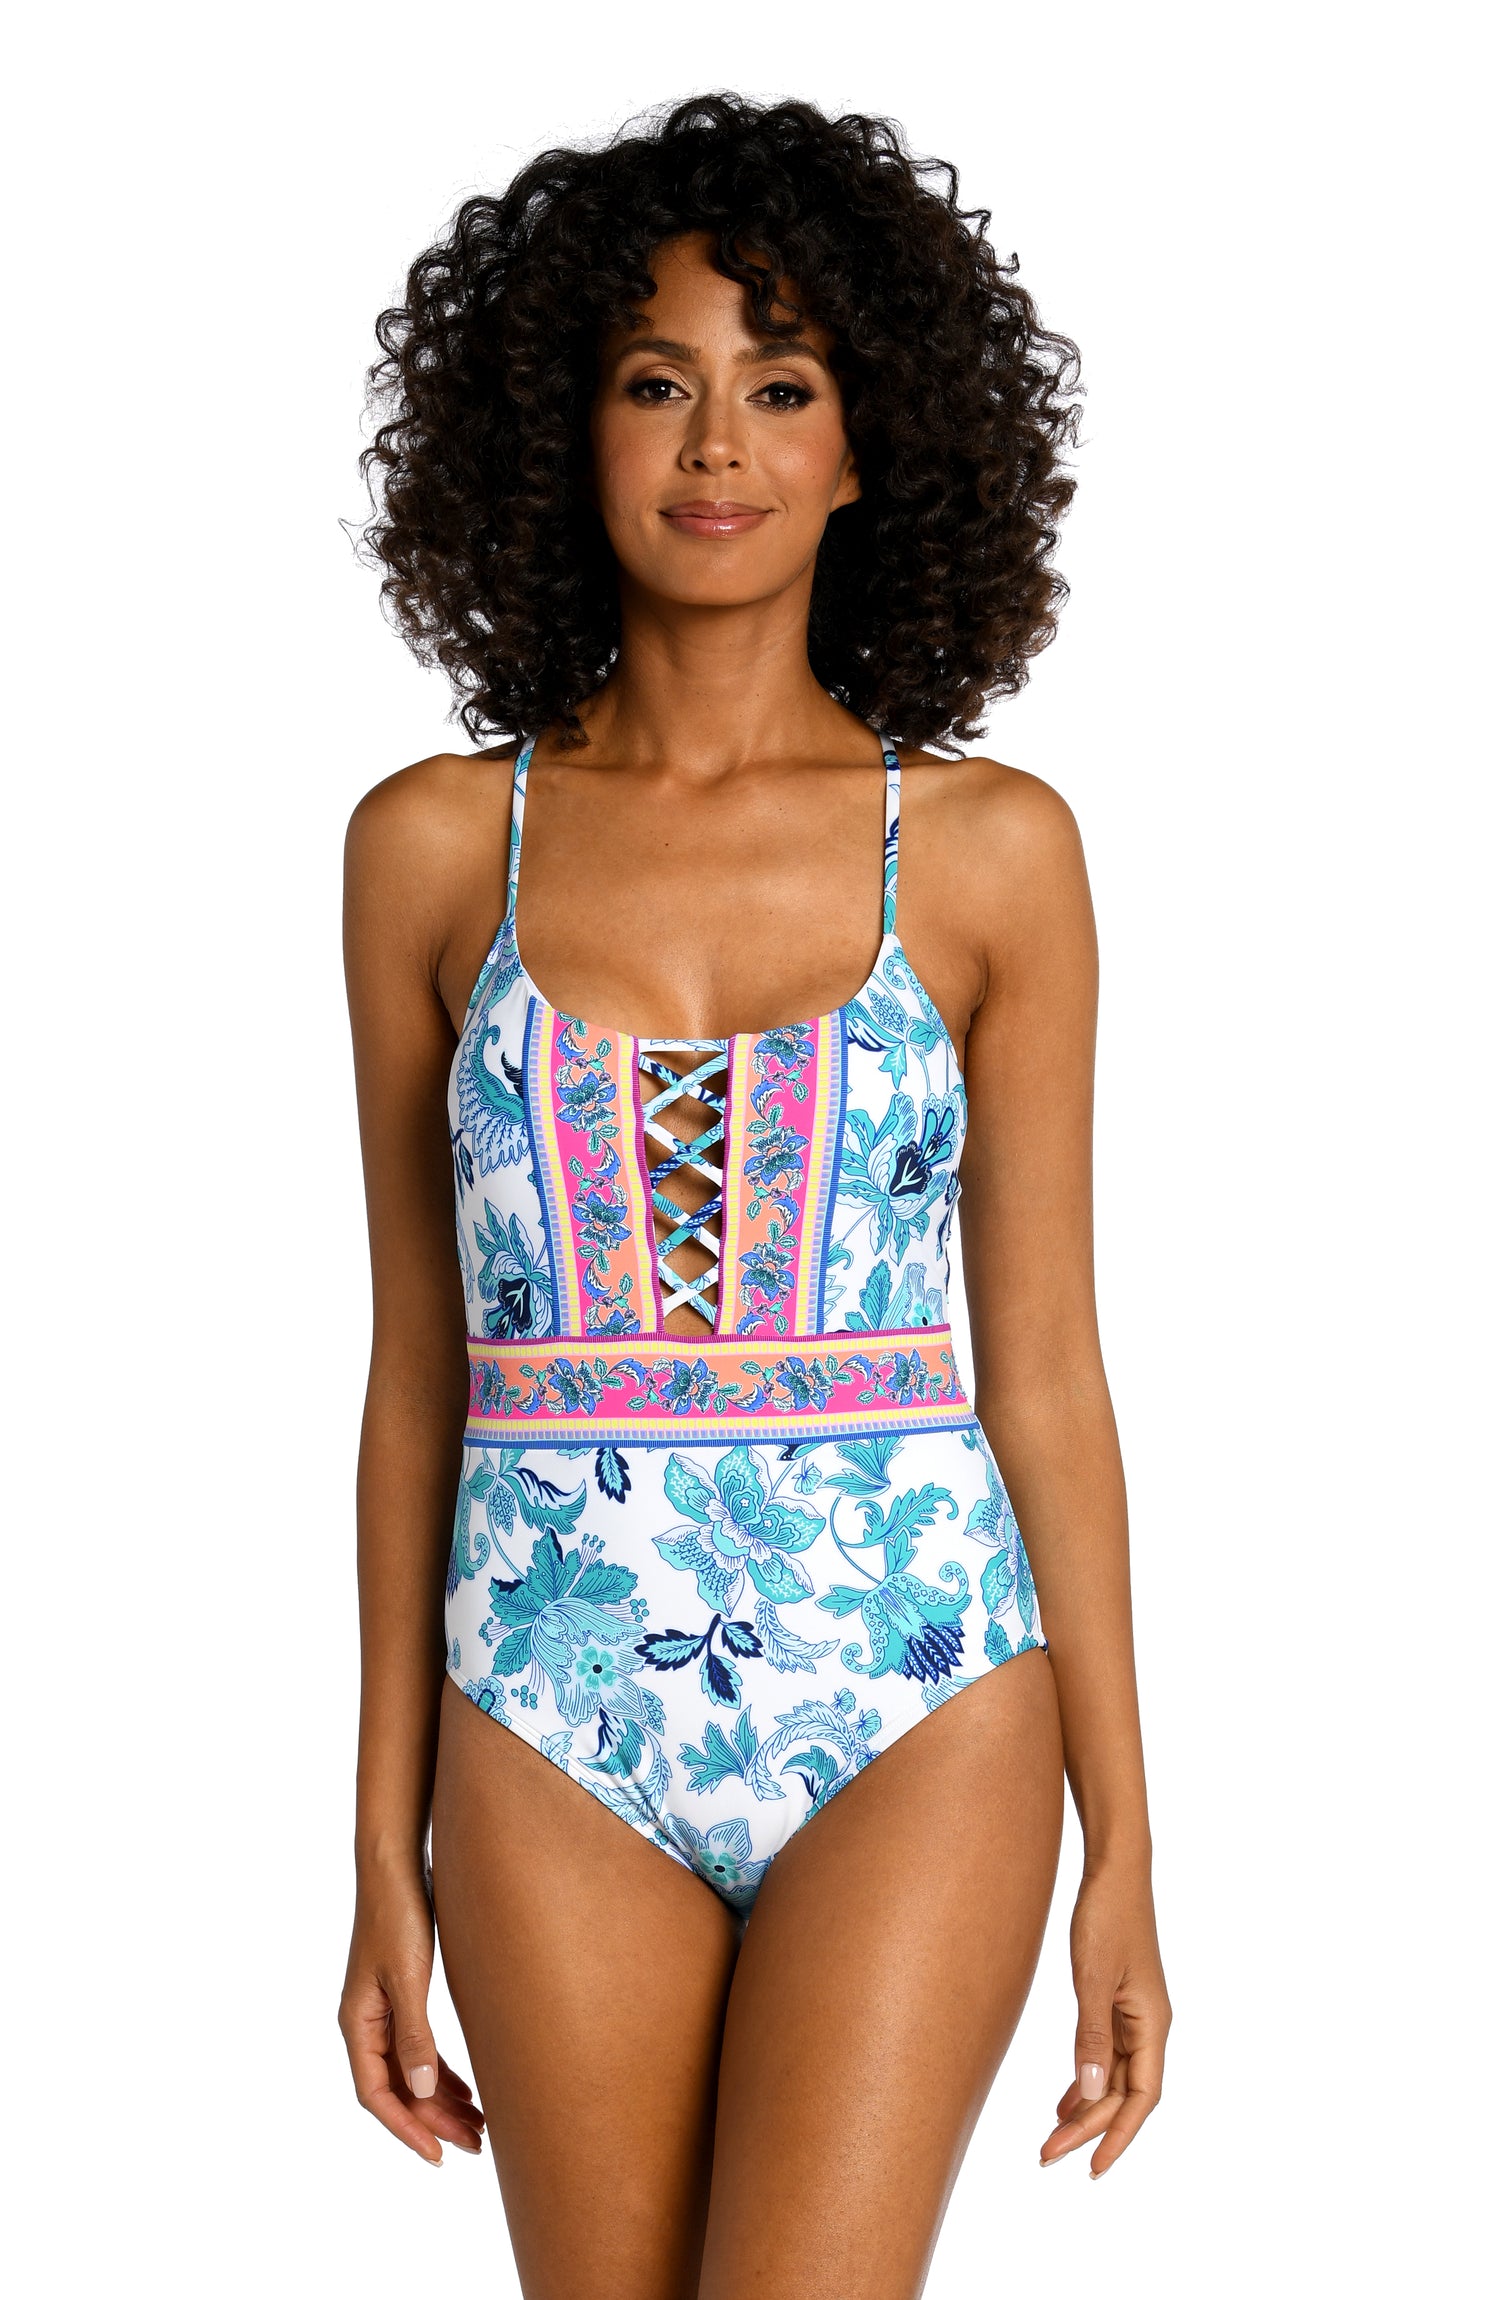 Model is wearing a light blue multi colored mediterranean printed strappy back one piece from our Santorini Sun collection!